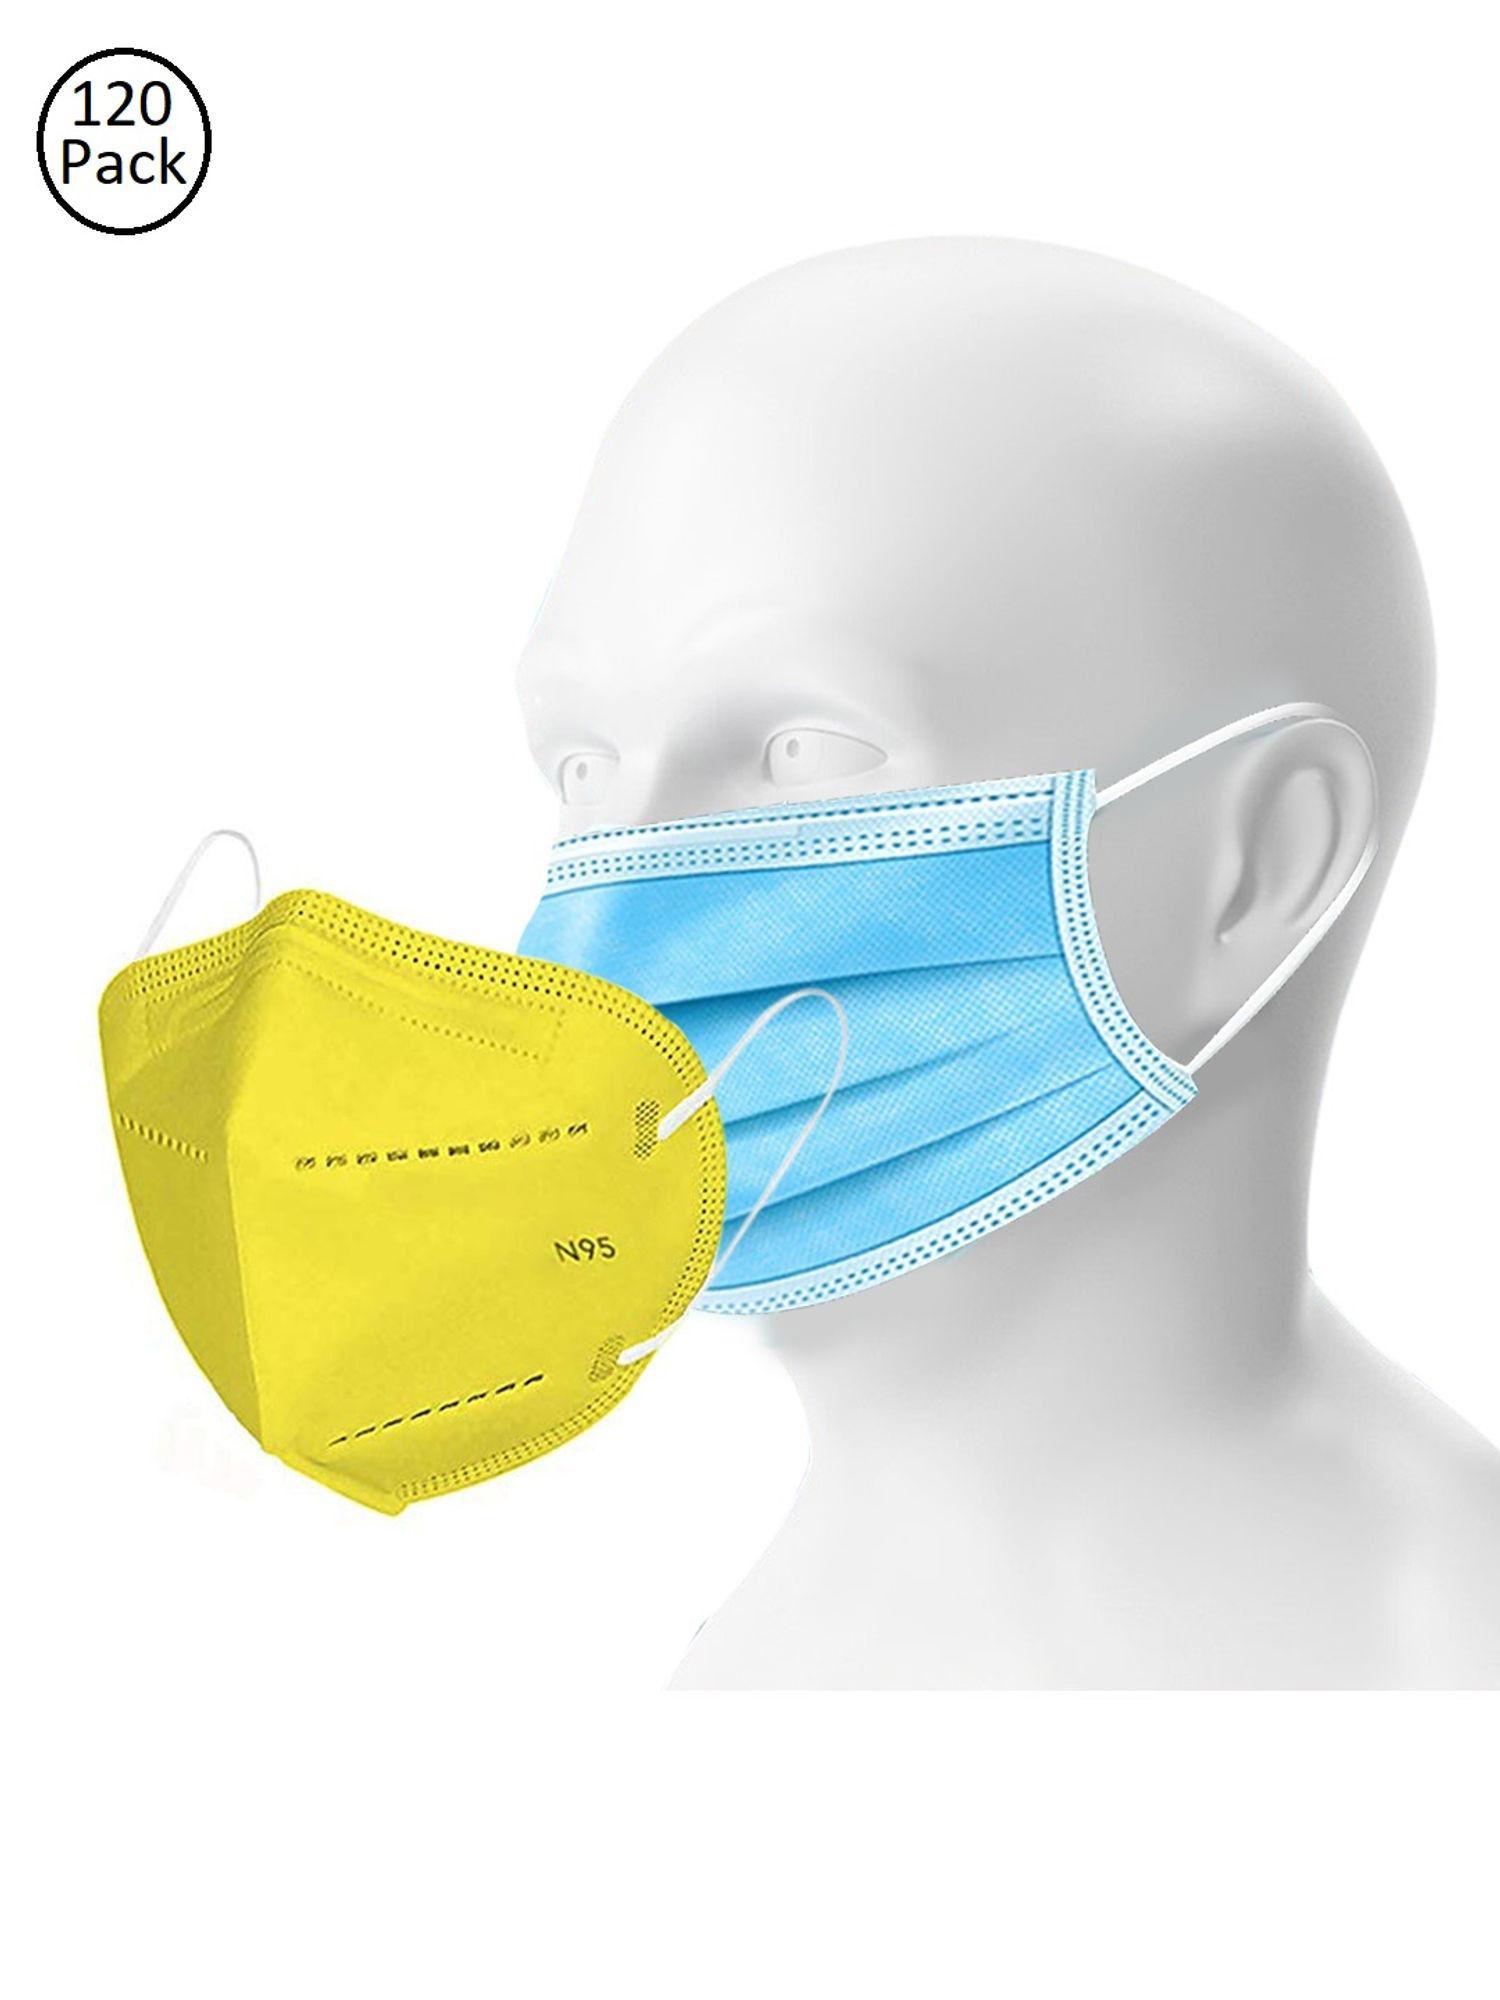 double mask set of 100 disposable & 20 reusable kn95 n95 masks